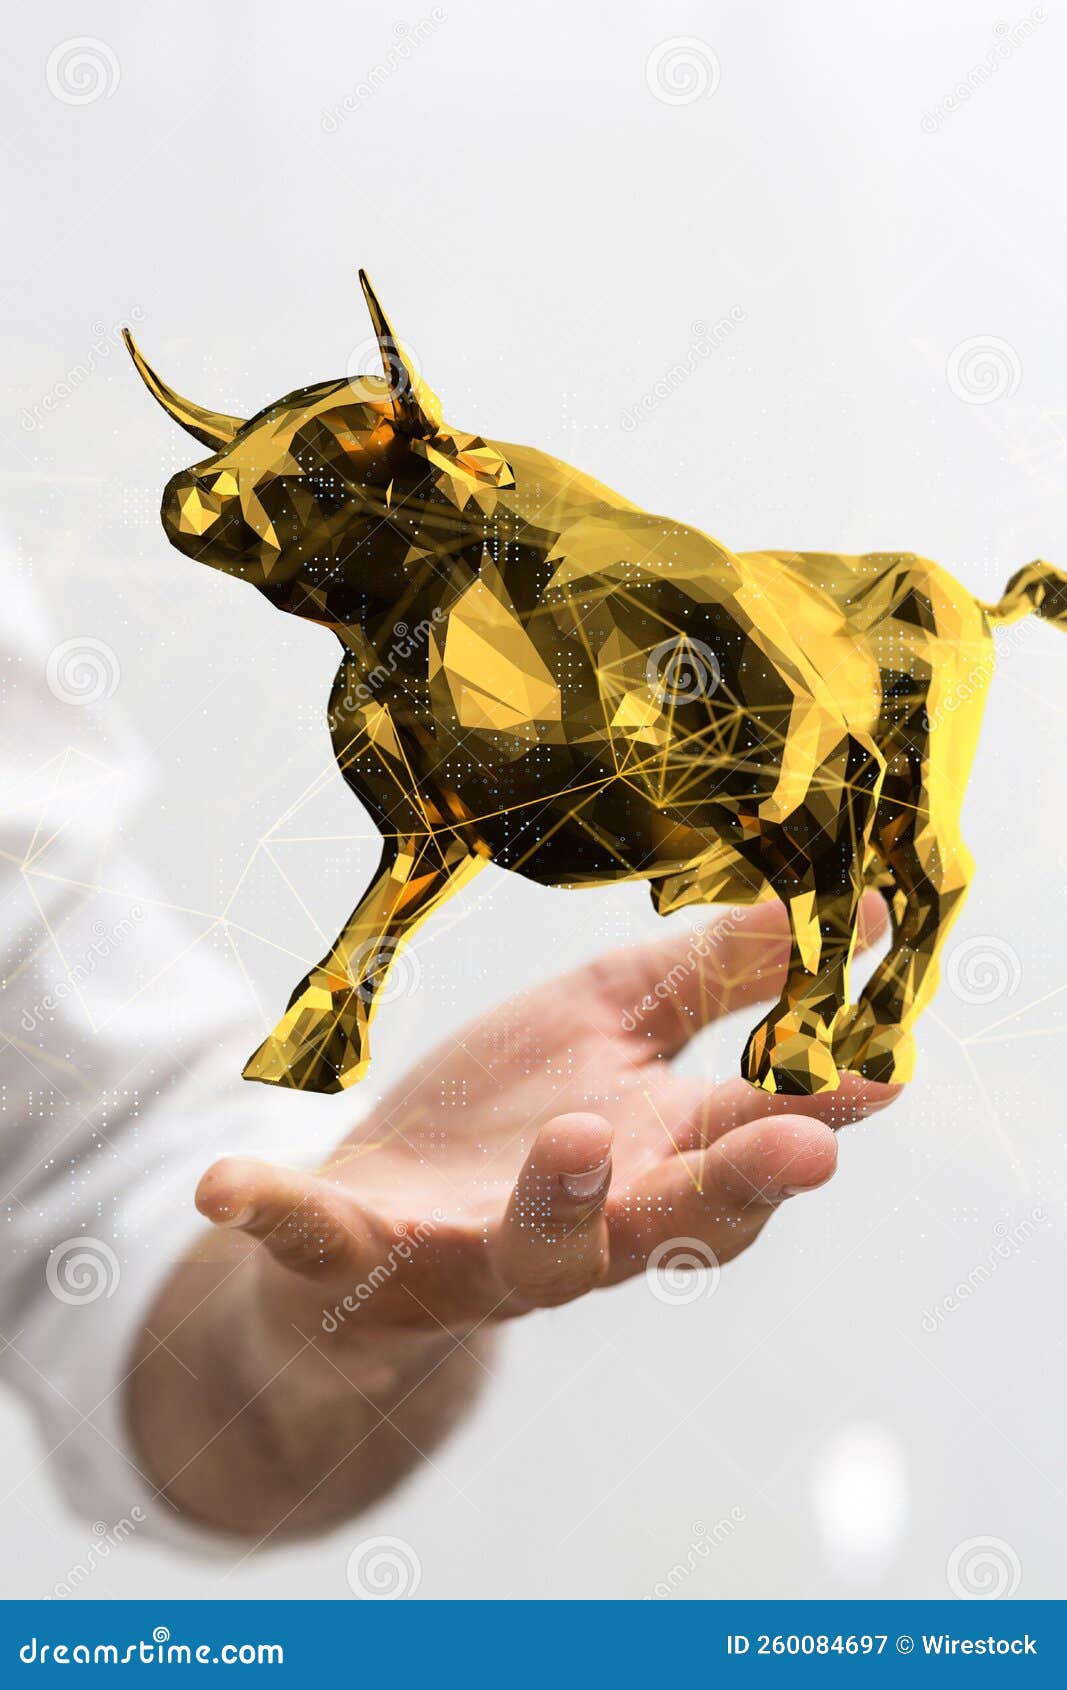 3D-rendered Golden Bull Figurine Floating Above a Hand, a Concept